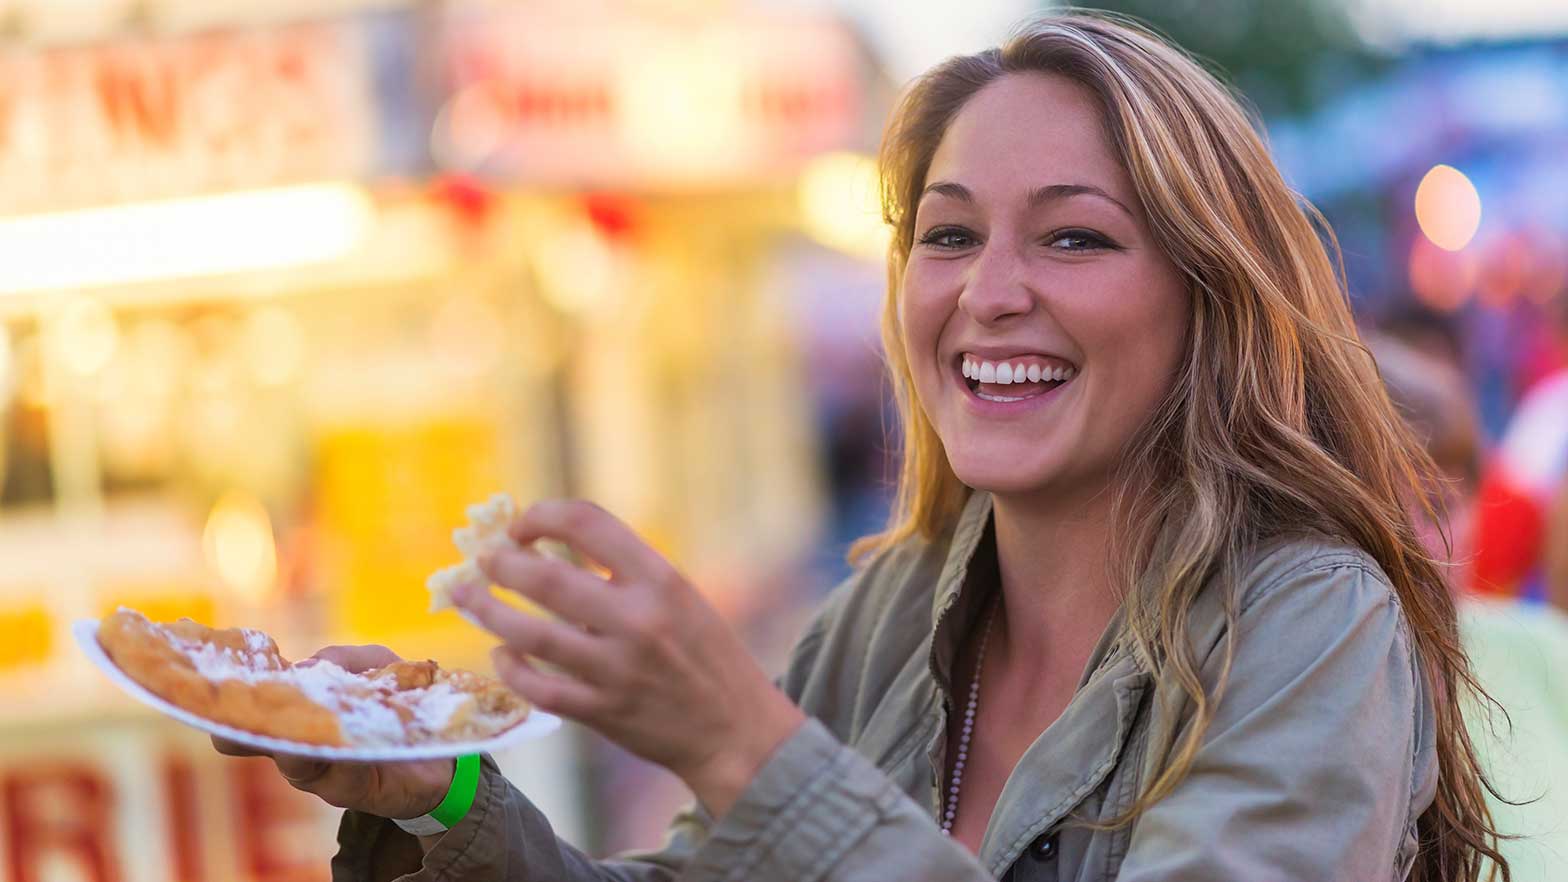 image of a woman eating funnel cake at a fair